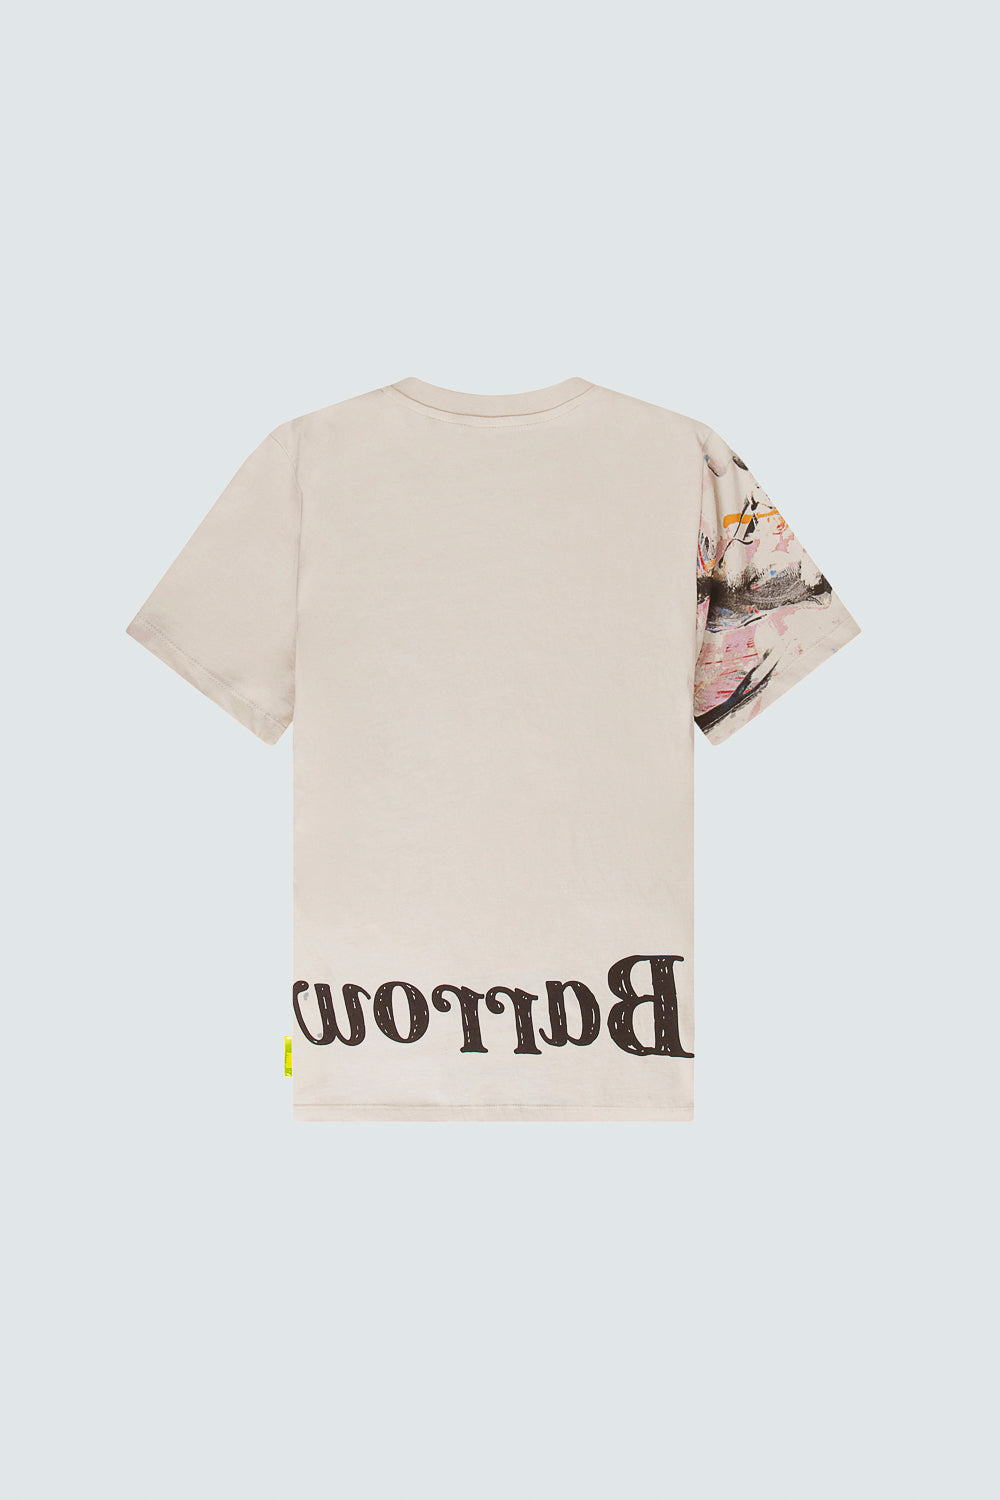 Buy the Barrow Painted Logo T-Shirt in Off White at Intro. Spend £50 for free UK delivery. Official stockists. We ship worldwide.